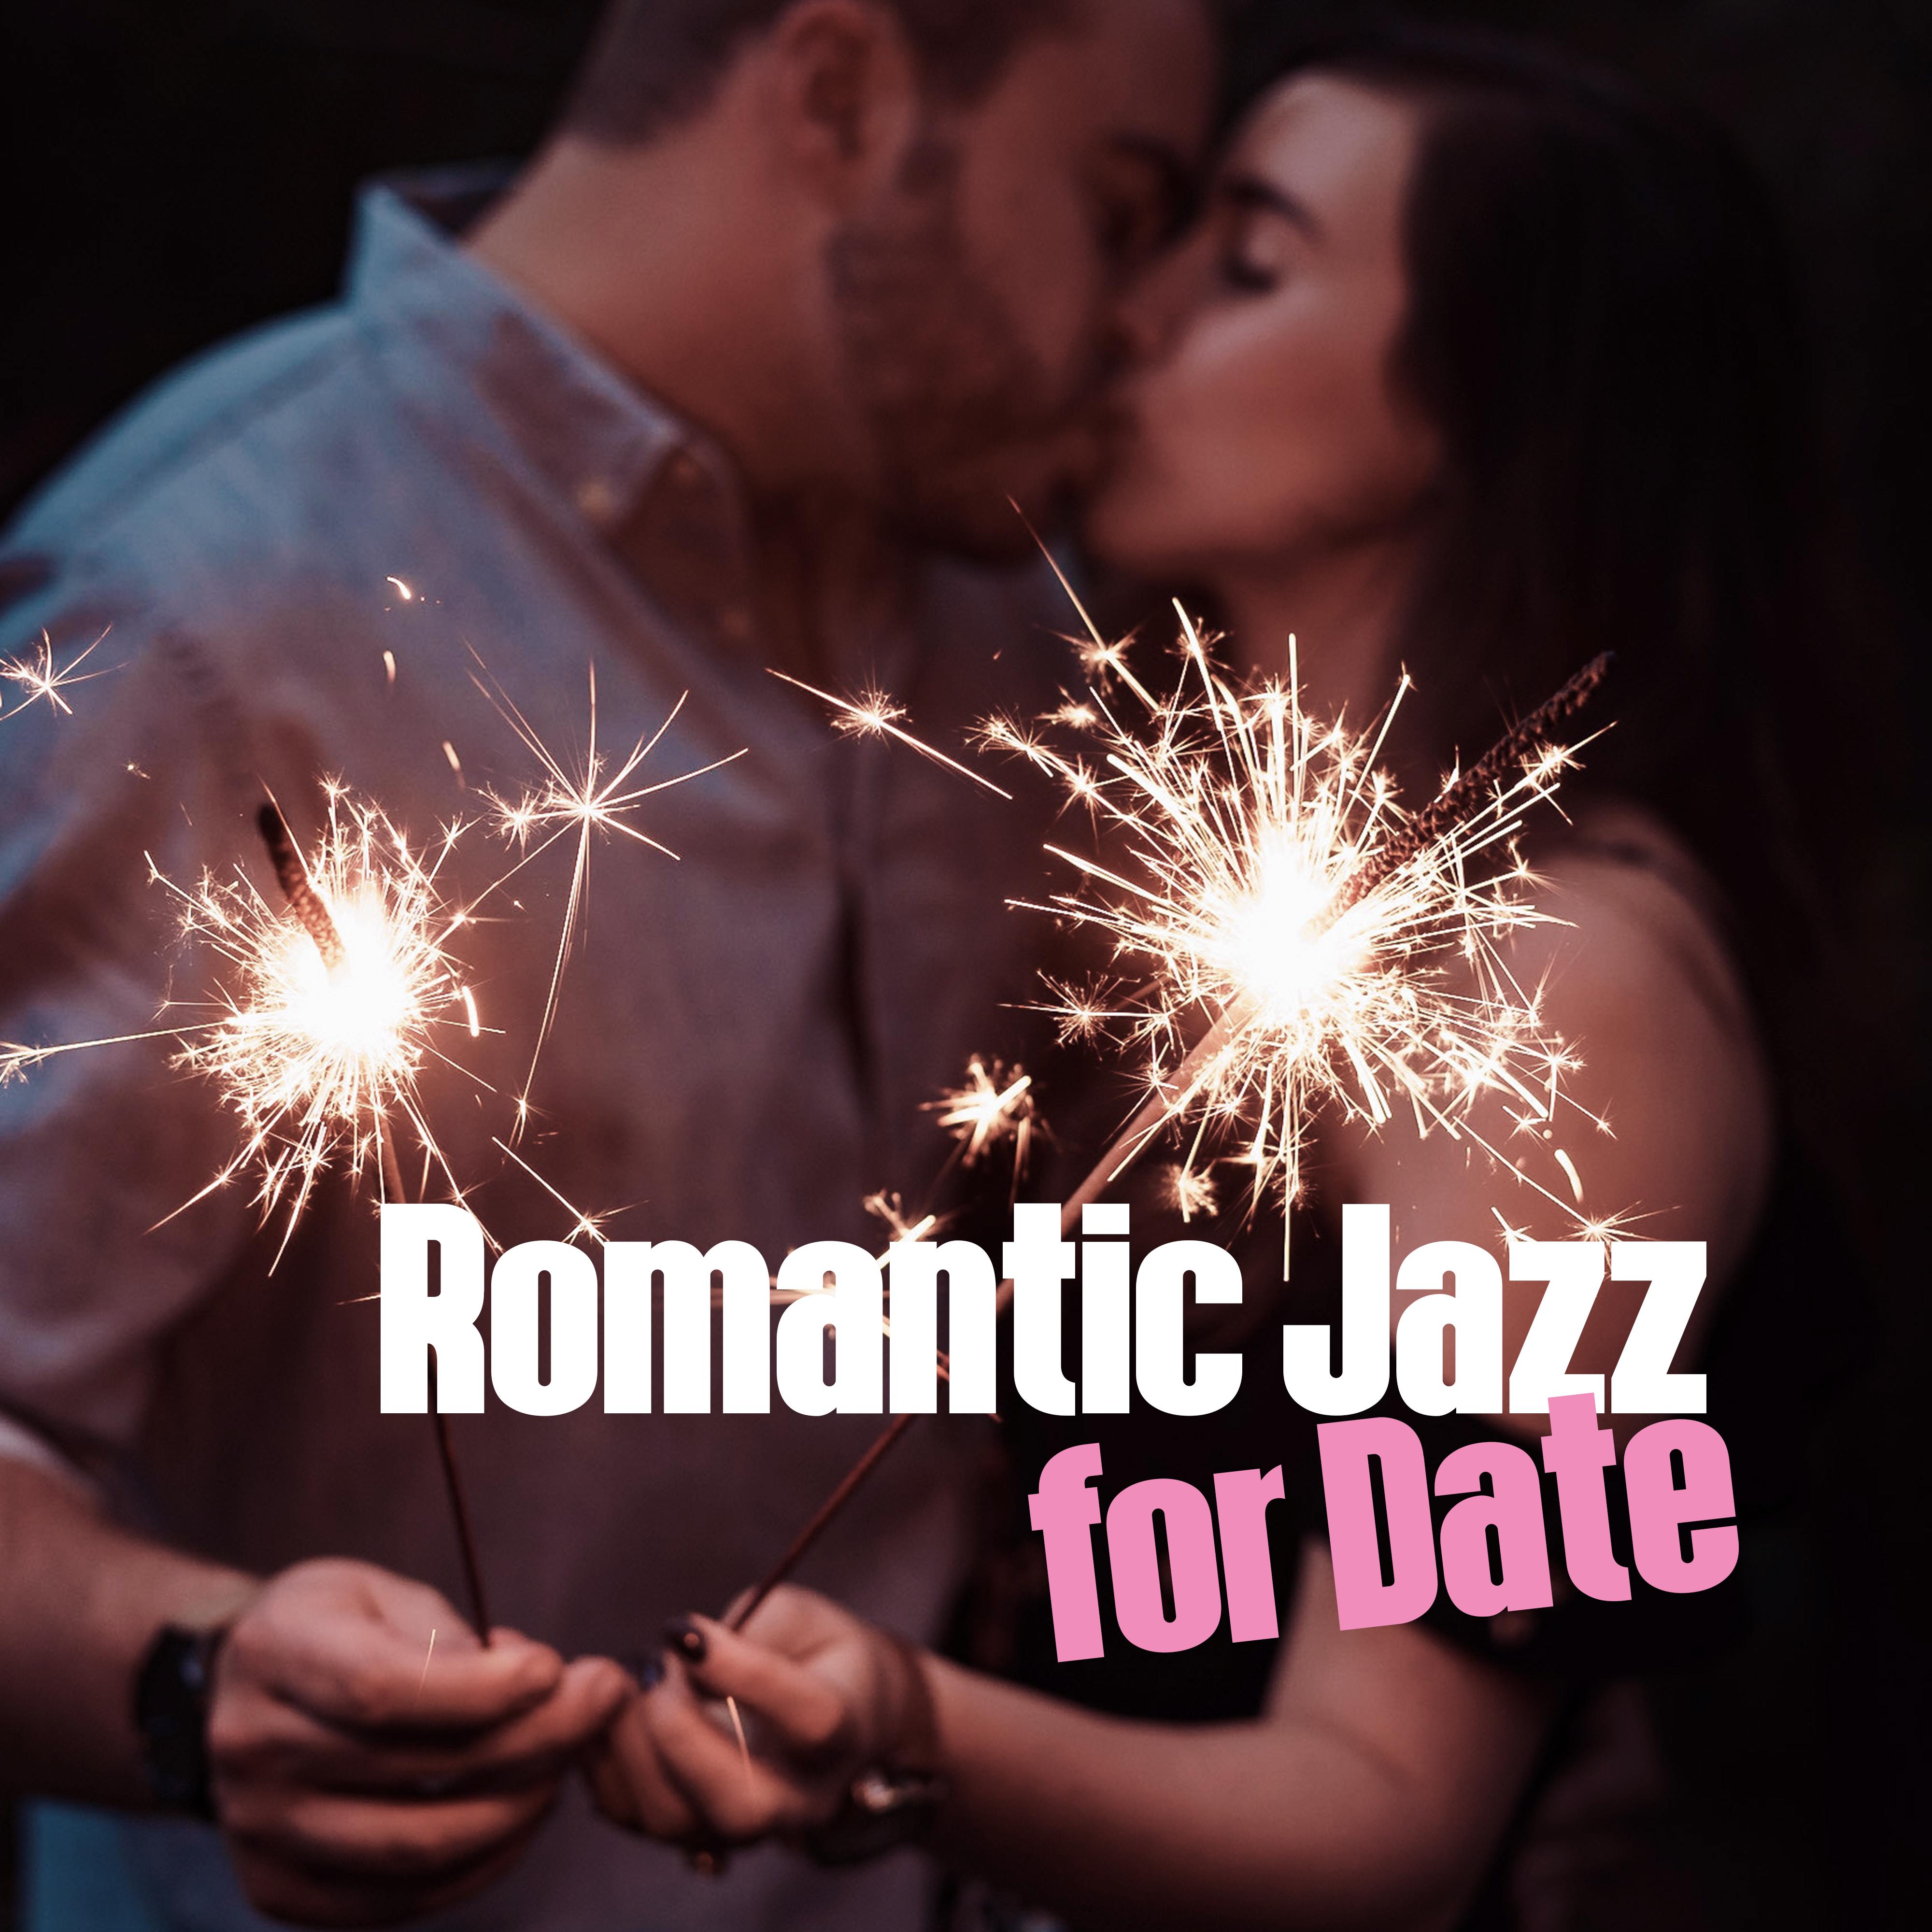 Romantic Jazz for Date – Sensual Note for Lovers, Jazz Music, Smooth Night Songs, Moonlight Jazz